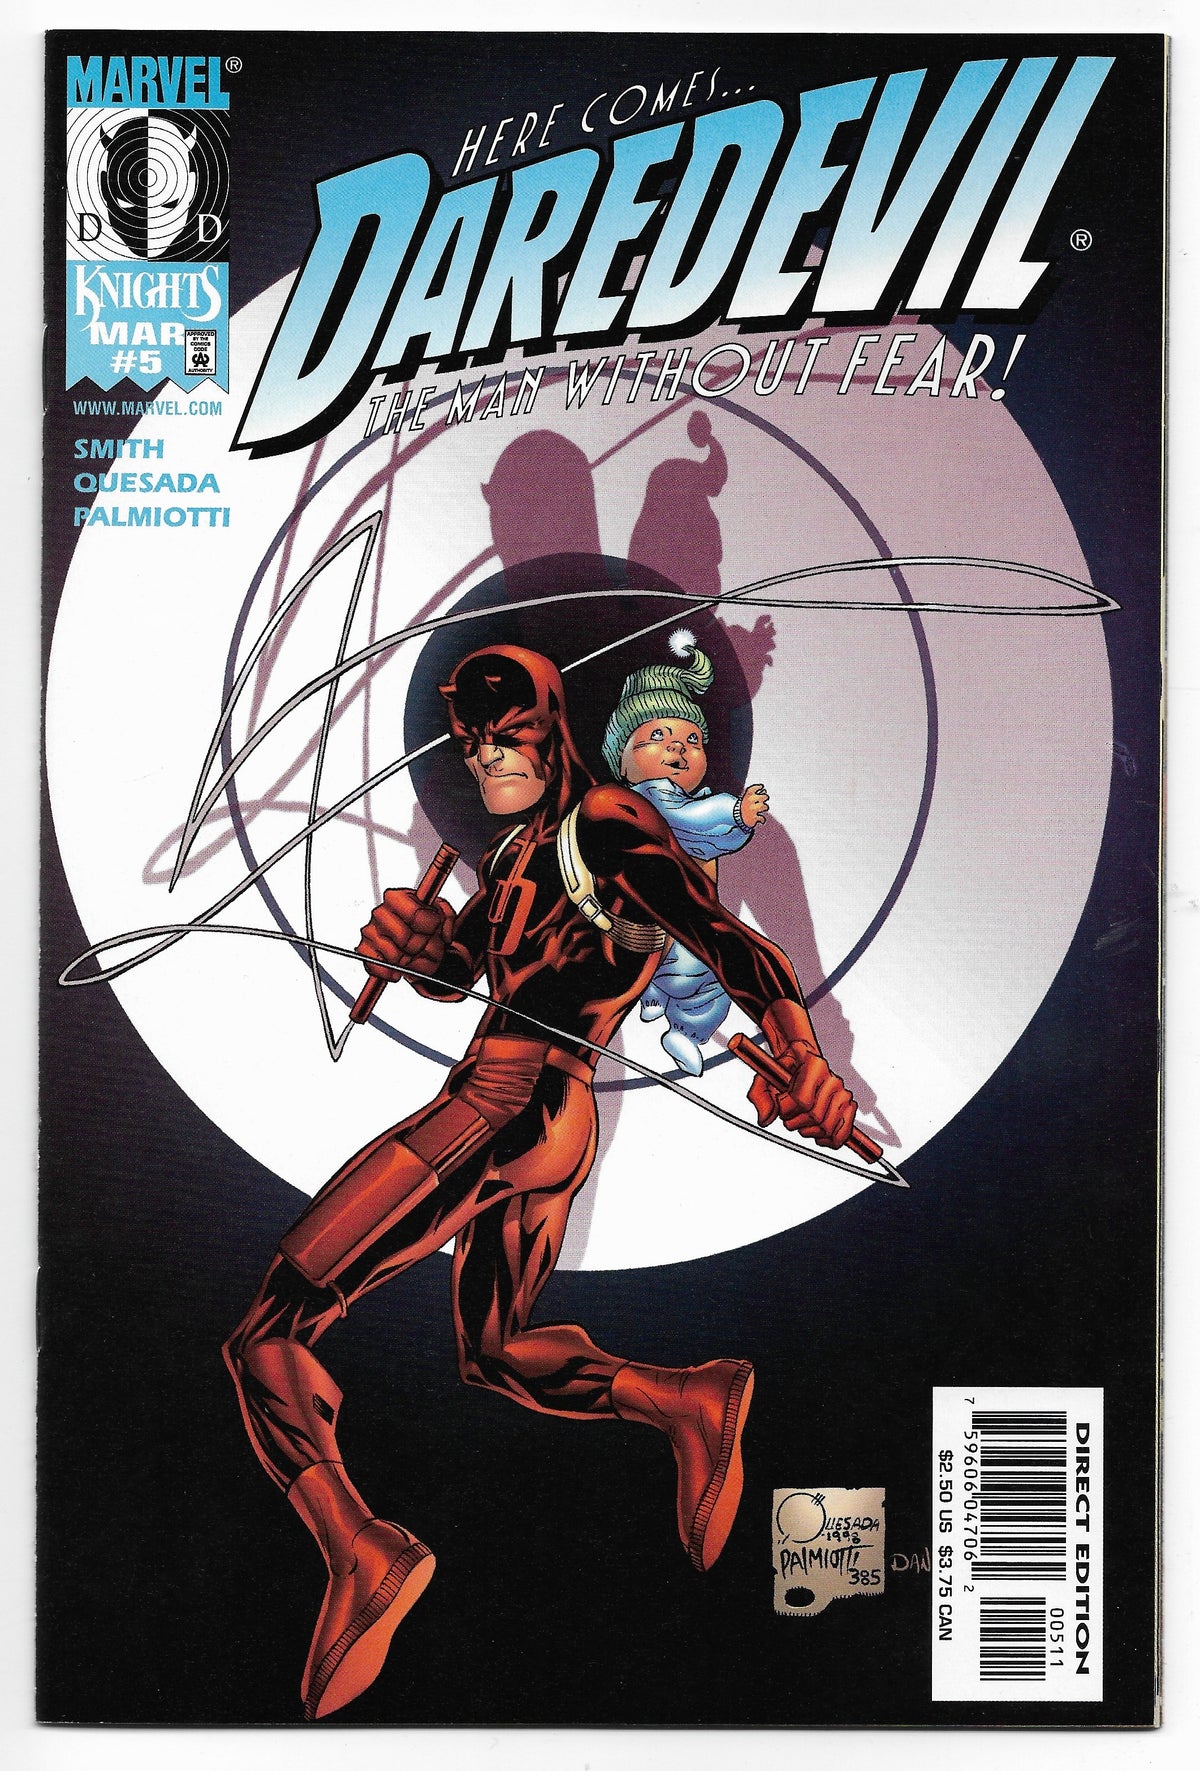 Photo of Daredevil, Vol. 2 (1999)  Iss 5A Near Mint  Comic sold by Stronghold Collectibles